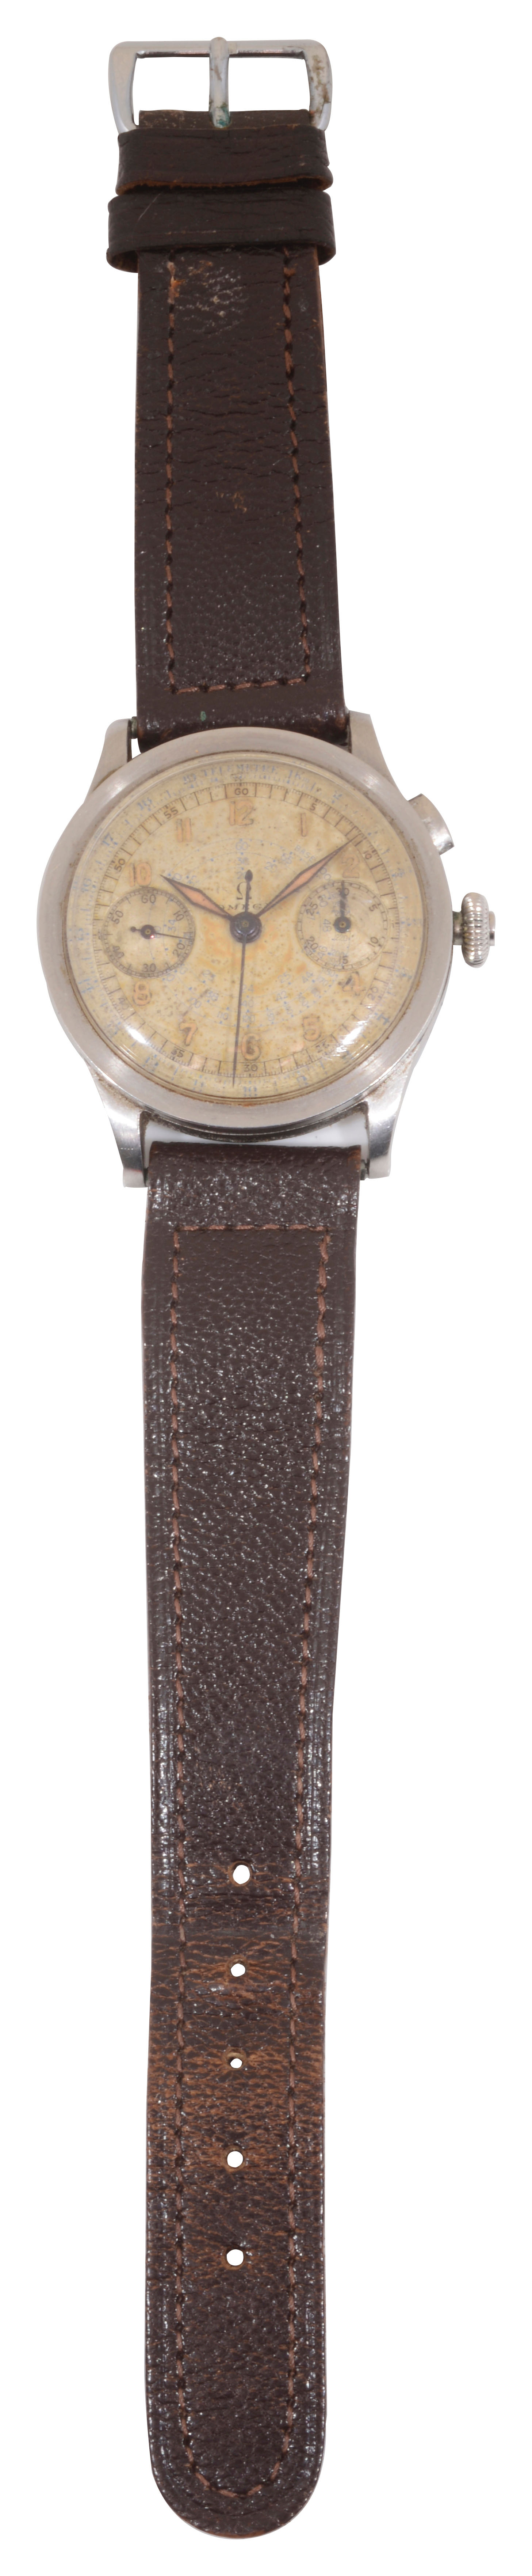 A rare gentleman's large size stainless steel Omega 33.3 monopusher chronograph wristwatch c.1939